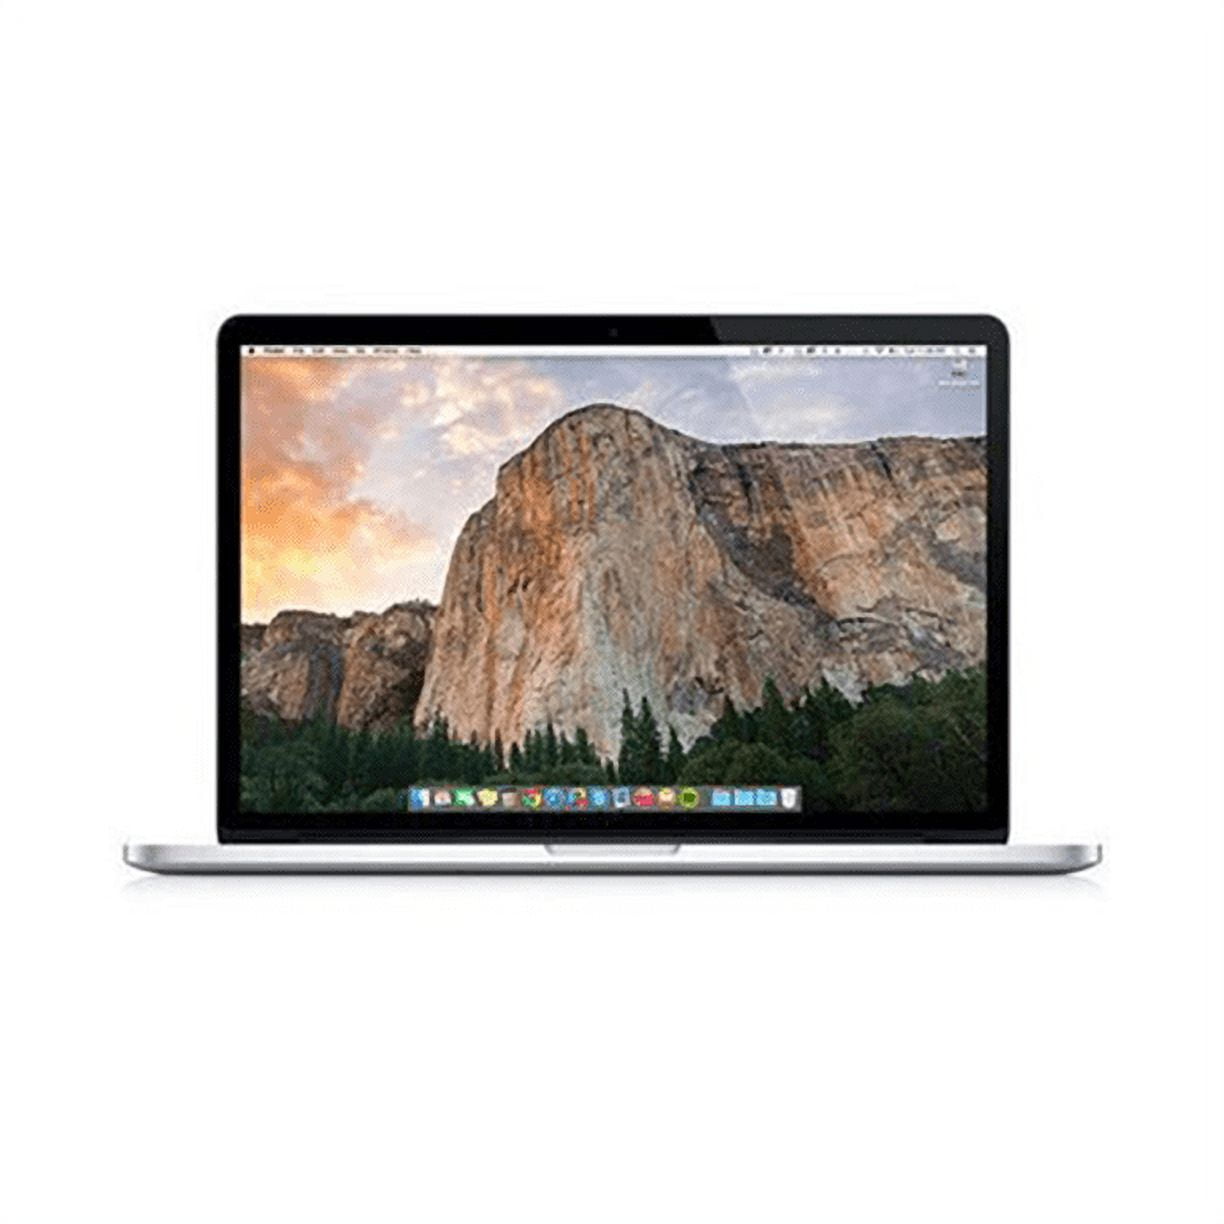 Apple MacBook Pro (15-inch, 2015) review: Old-school MacBook Pro is good  for the dongle averse - CNET